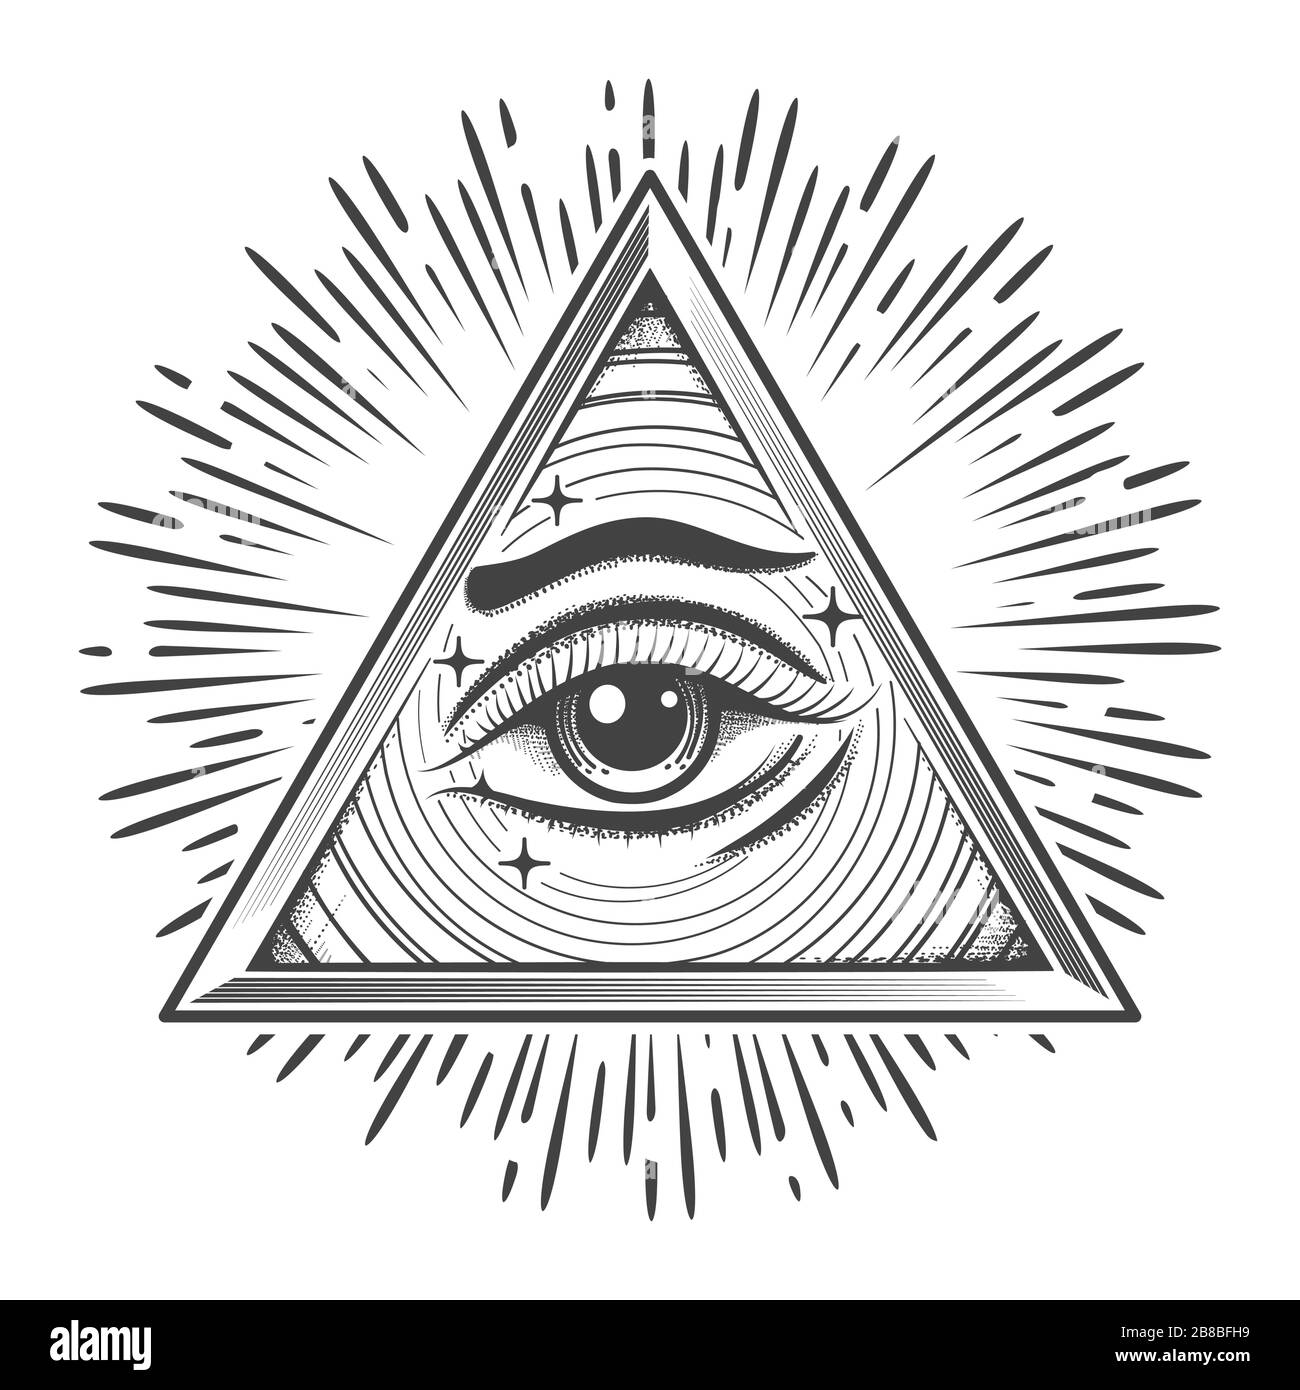 Eye in triangle Black and White Stock Photos & Images - Alamy